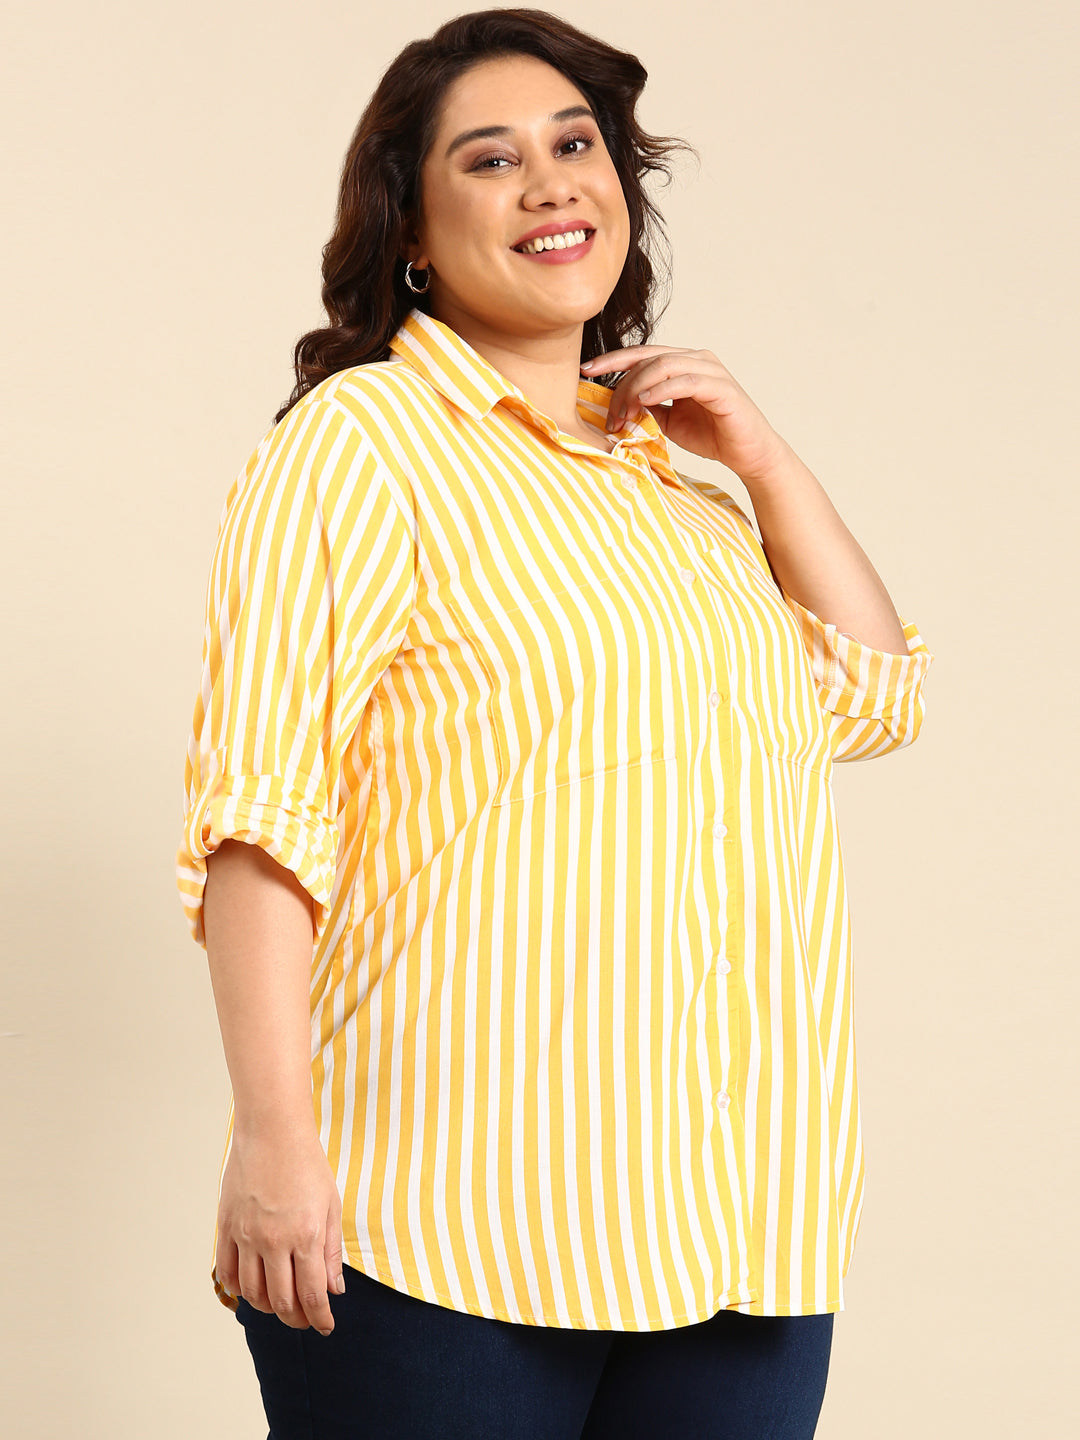 YELLOW STRIPE SHIRT WITH FRONT POCKET